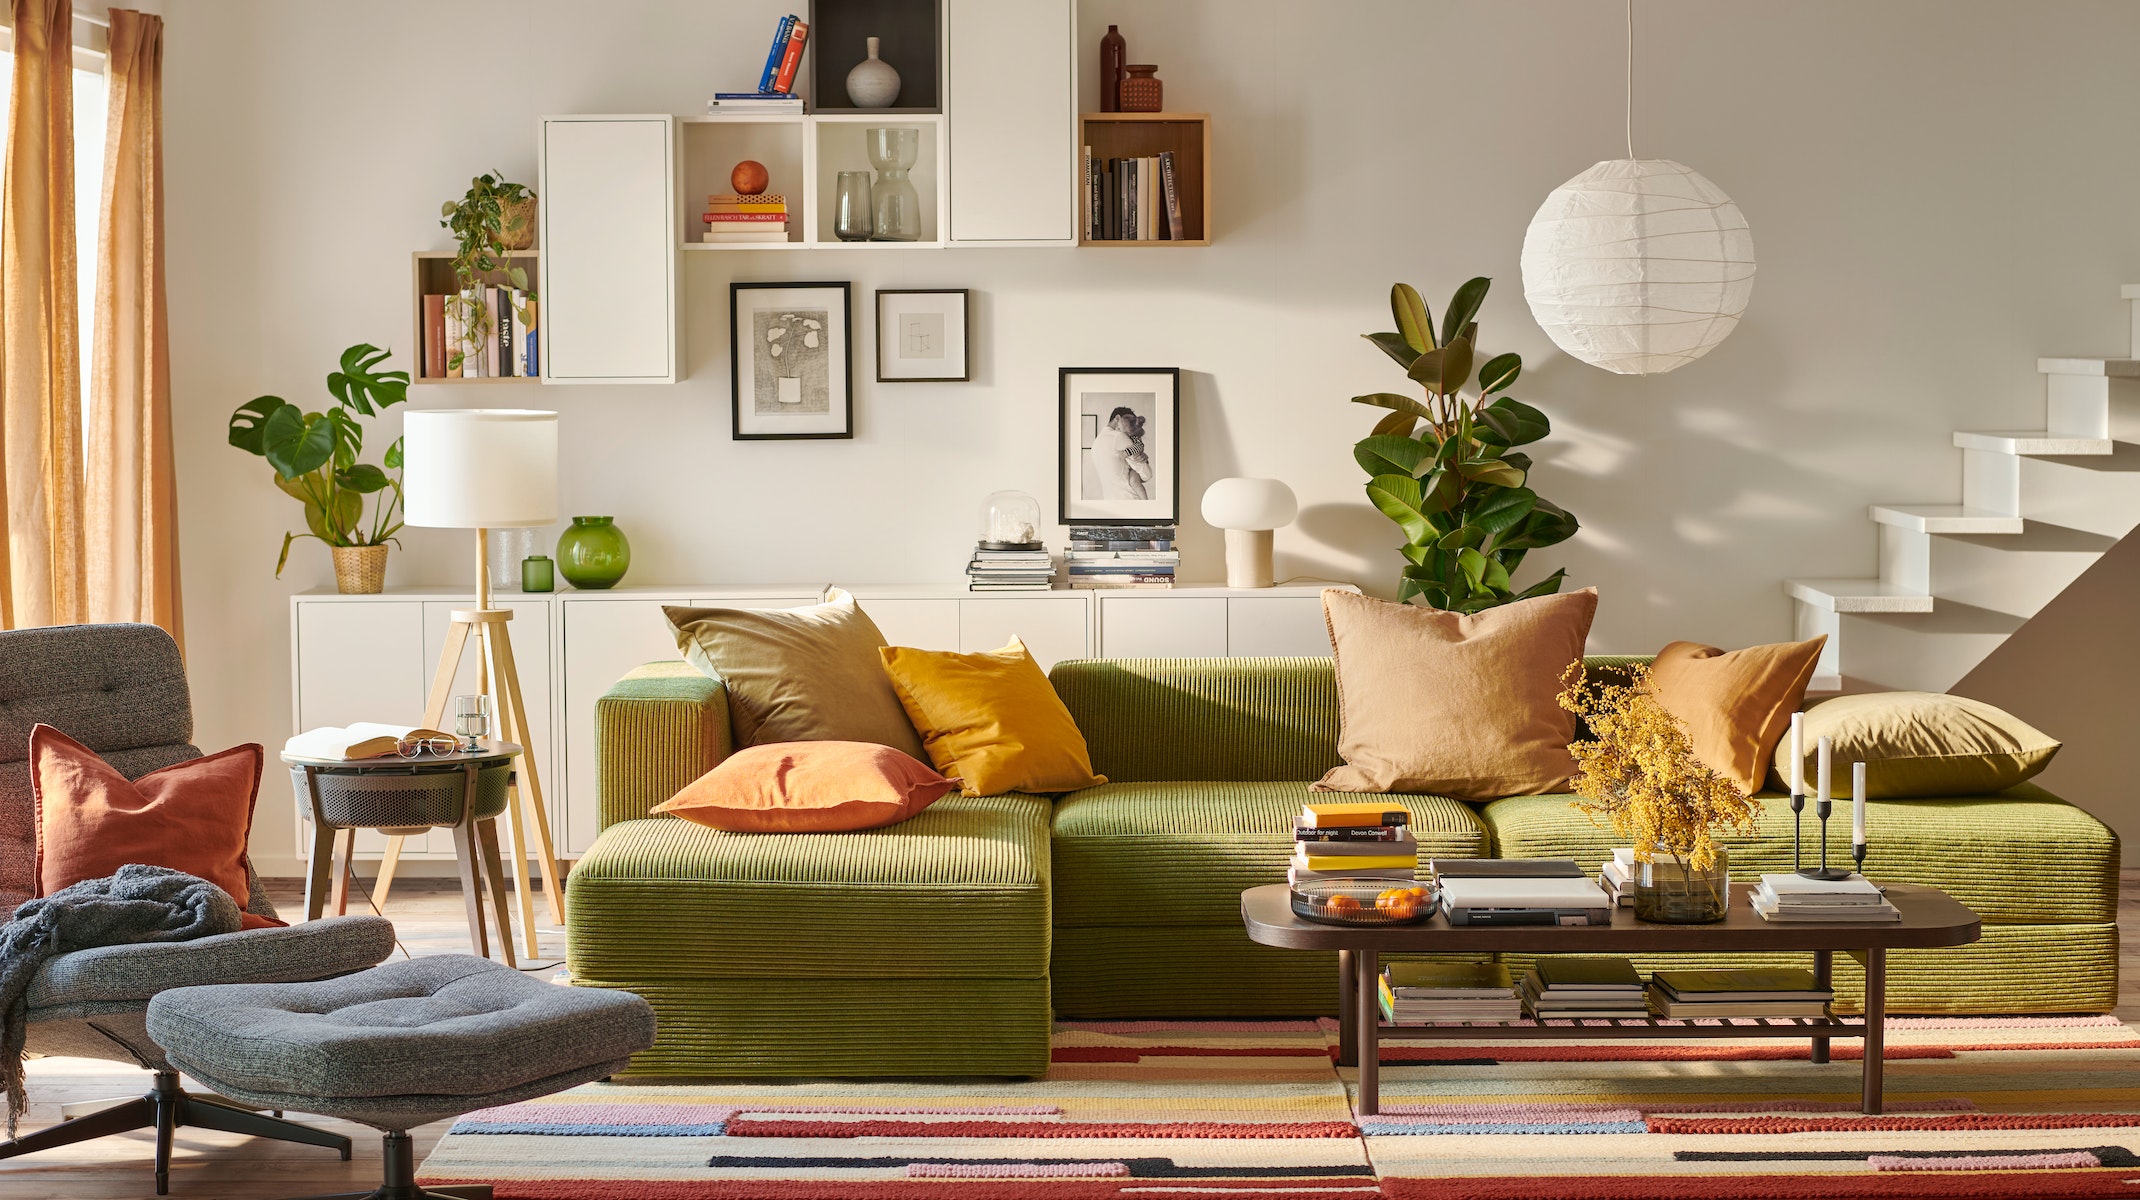 IKEA - A mid-century modern living room for modern times